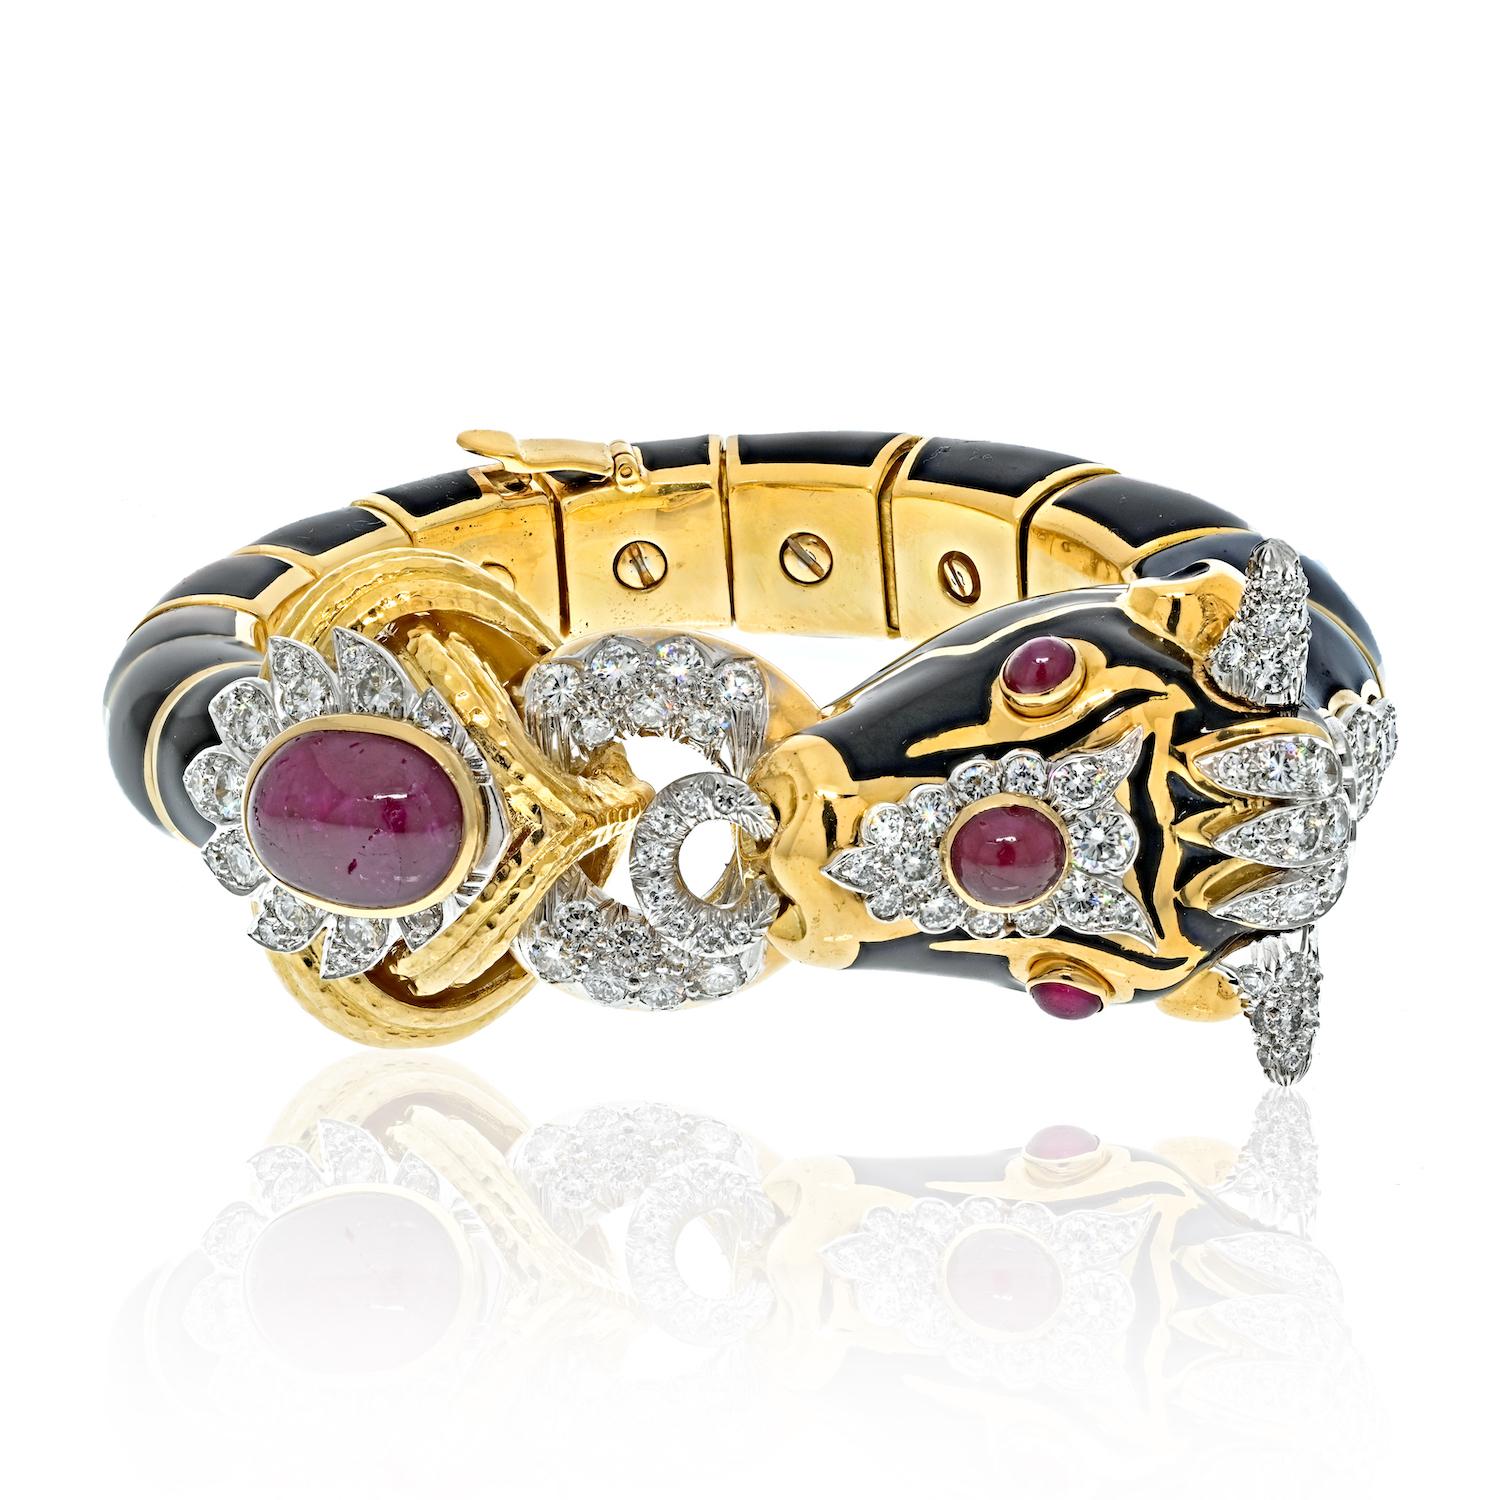 The David Webb Platinum & 18K Yellow Gold Black Enamel Red Ruby Diamond Bull Bracelet is a stunning piece of jewelry that exemplifies the extraordinary craftsmanship and attention to detail that the David Webb brand is known for. This exquisite